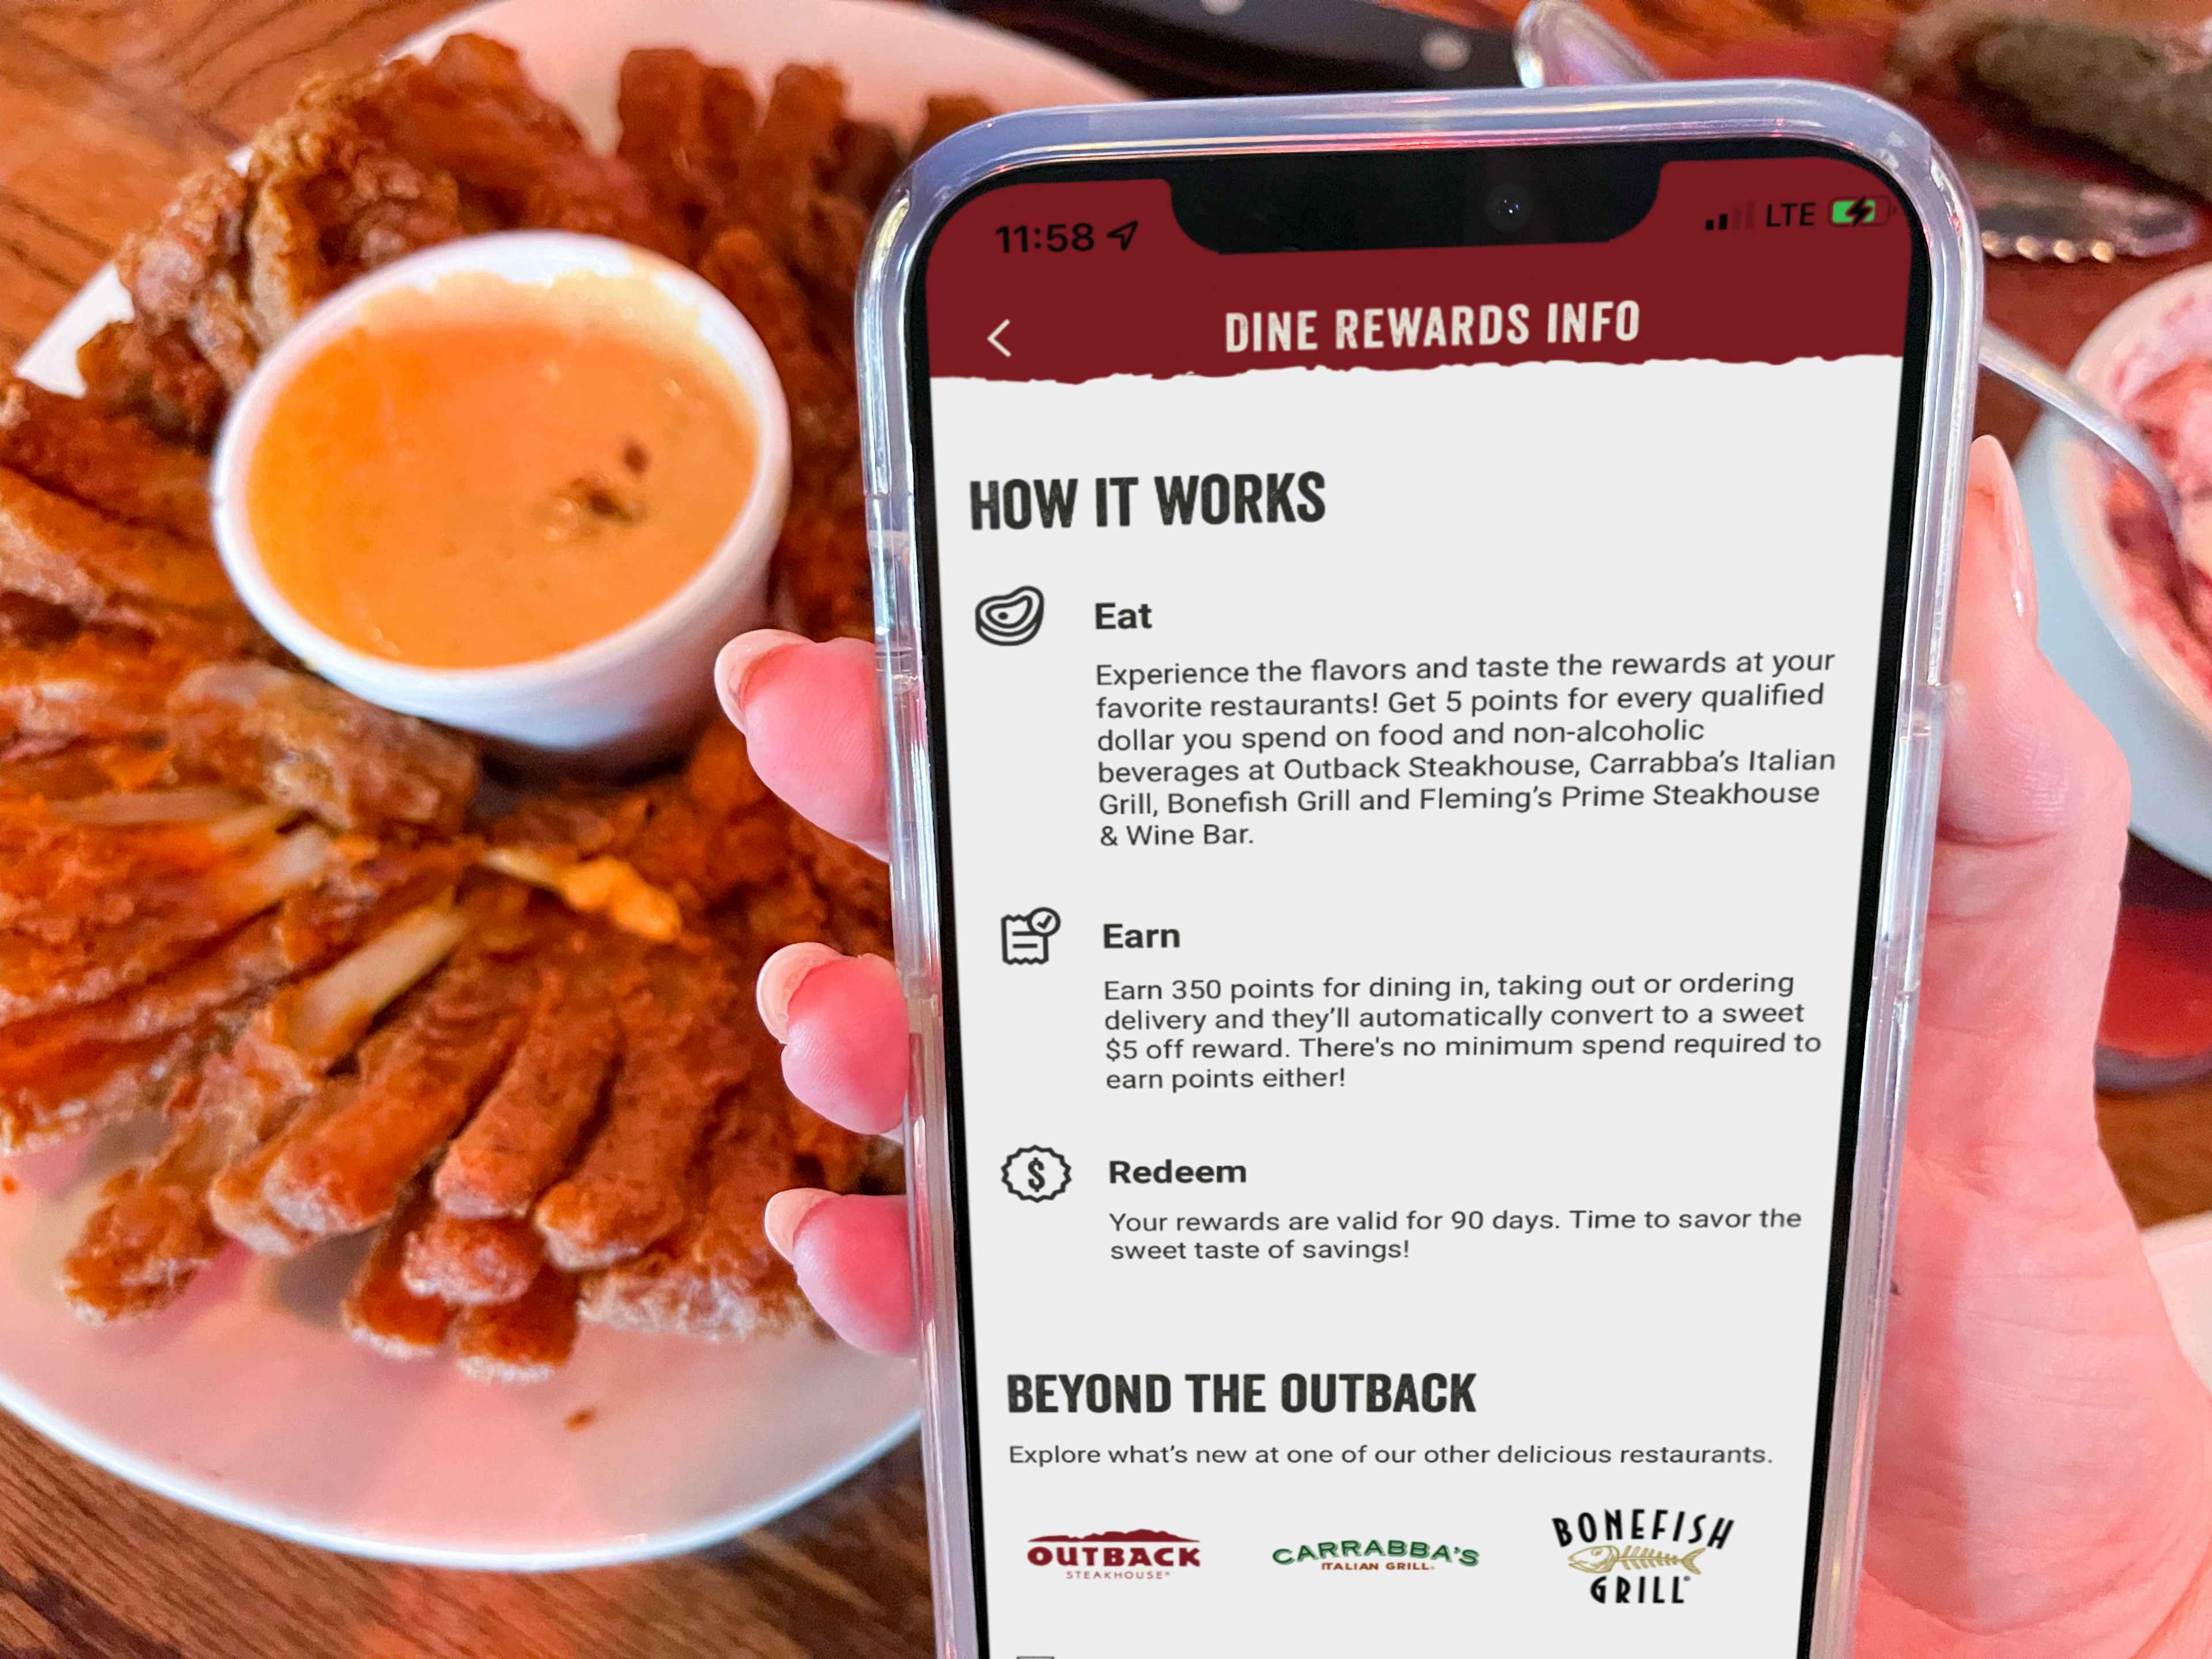 A person's hand holding their phone displaying Outback Steakhouse's Dine Rewards Info in front of a plate of a Bloomin' Onion